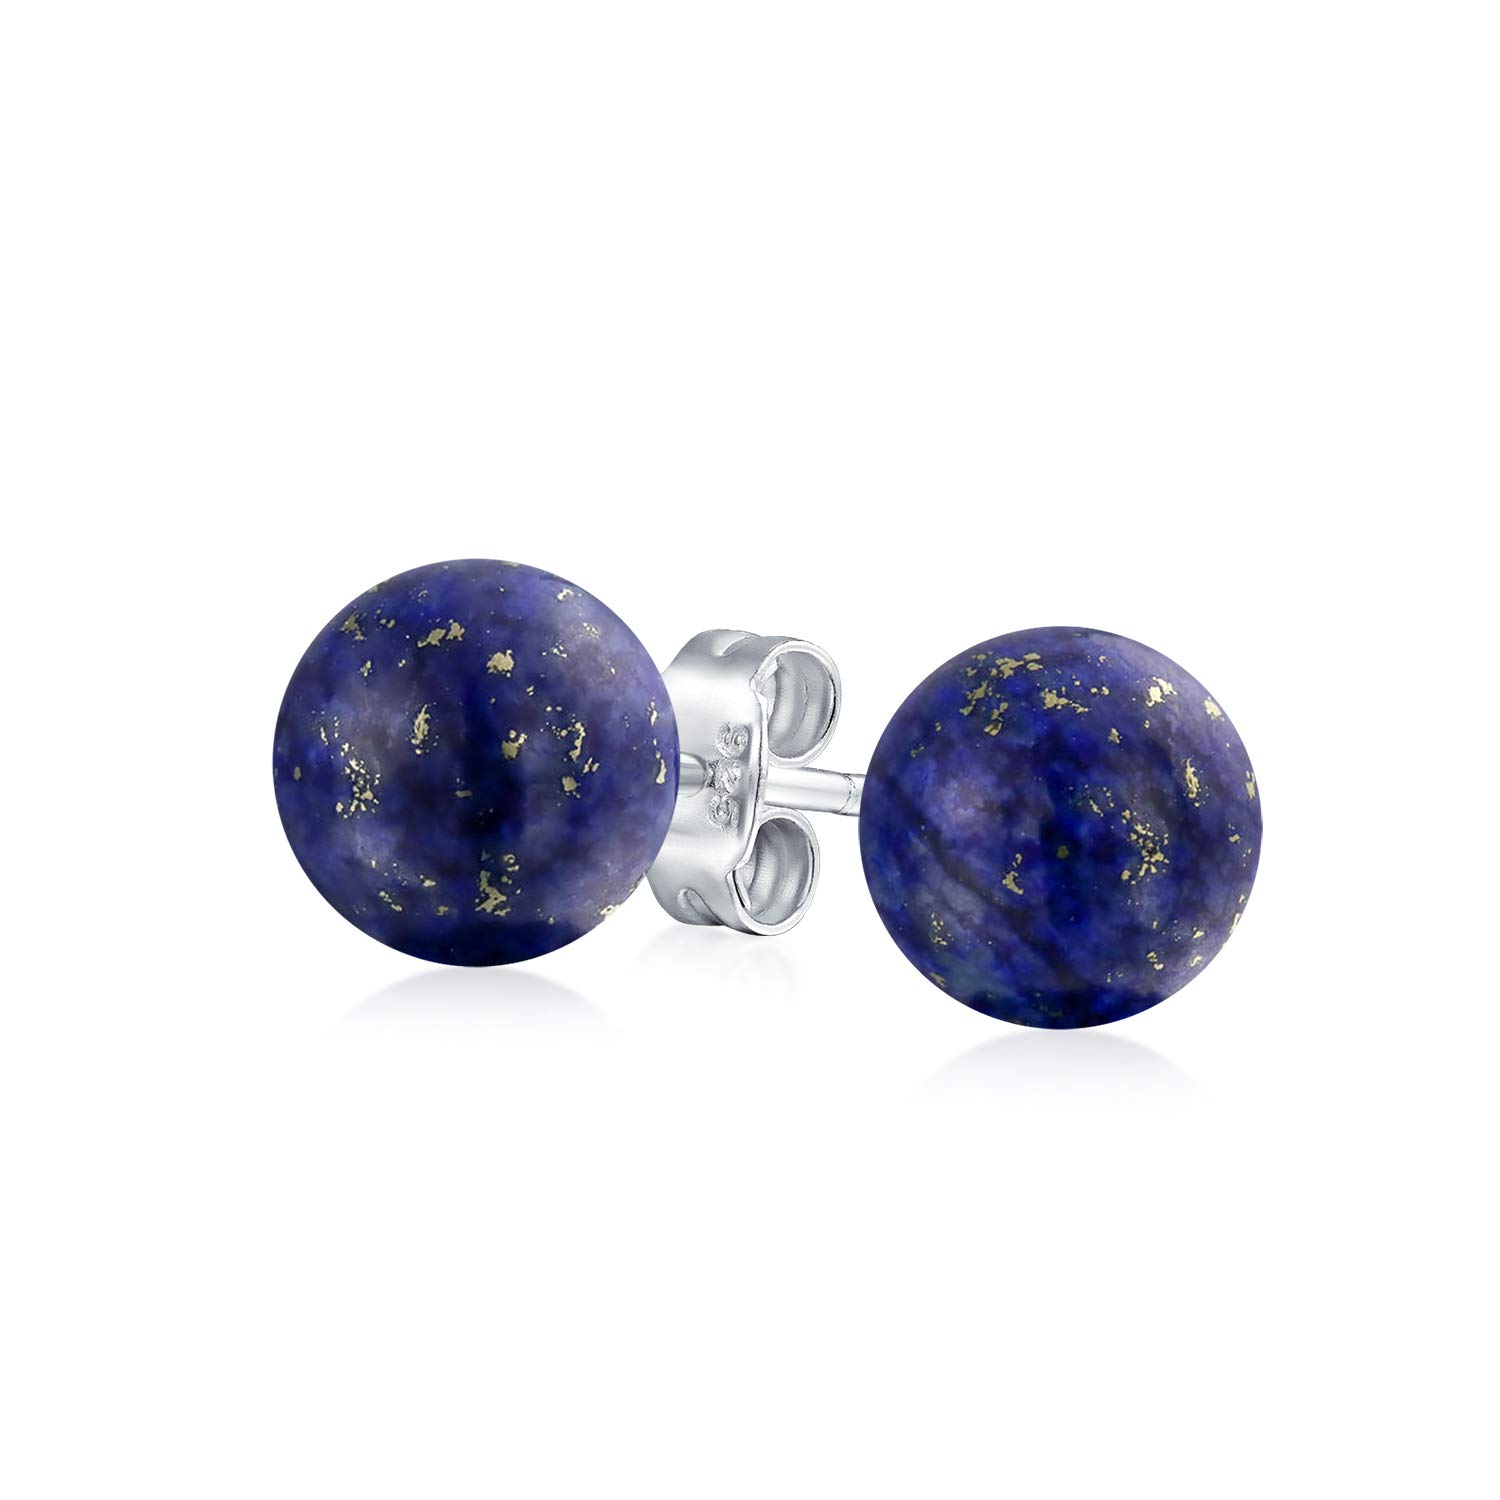 Large 10MM Natural Gemstone Round Bead Ball Stud Earrings .925 Sterling Silver for Women Teens -Variety of Birthstones